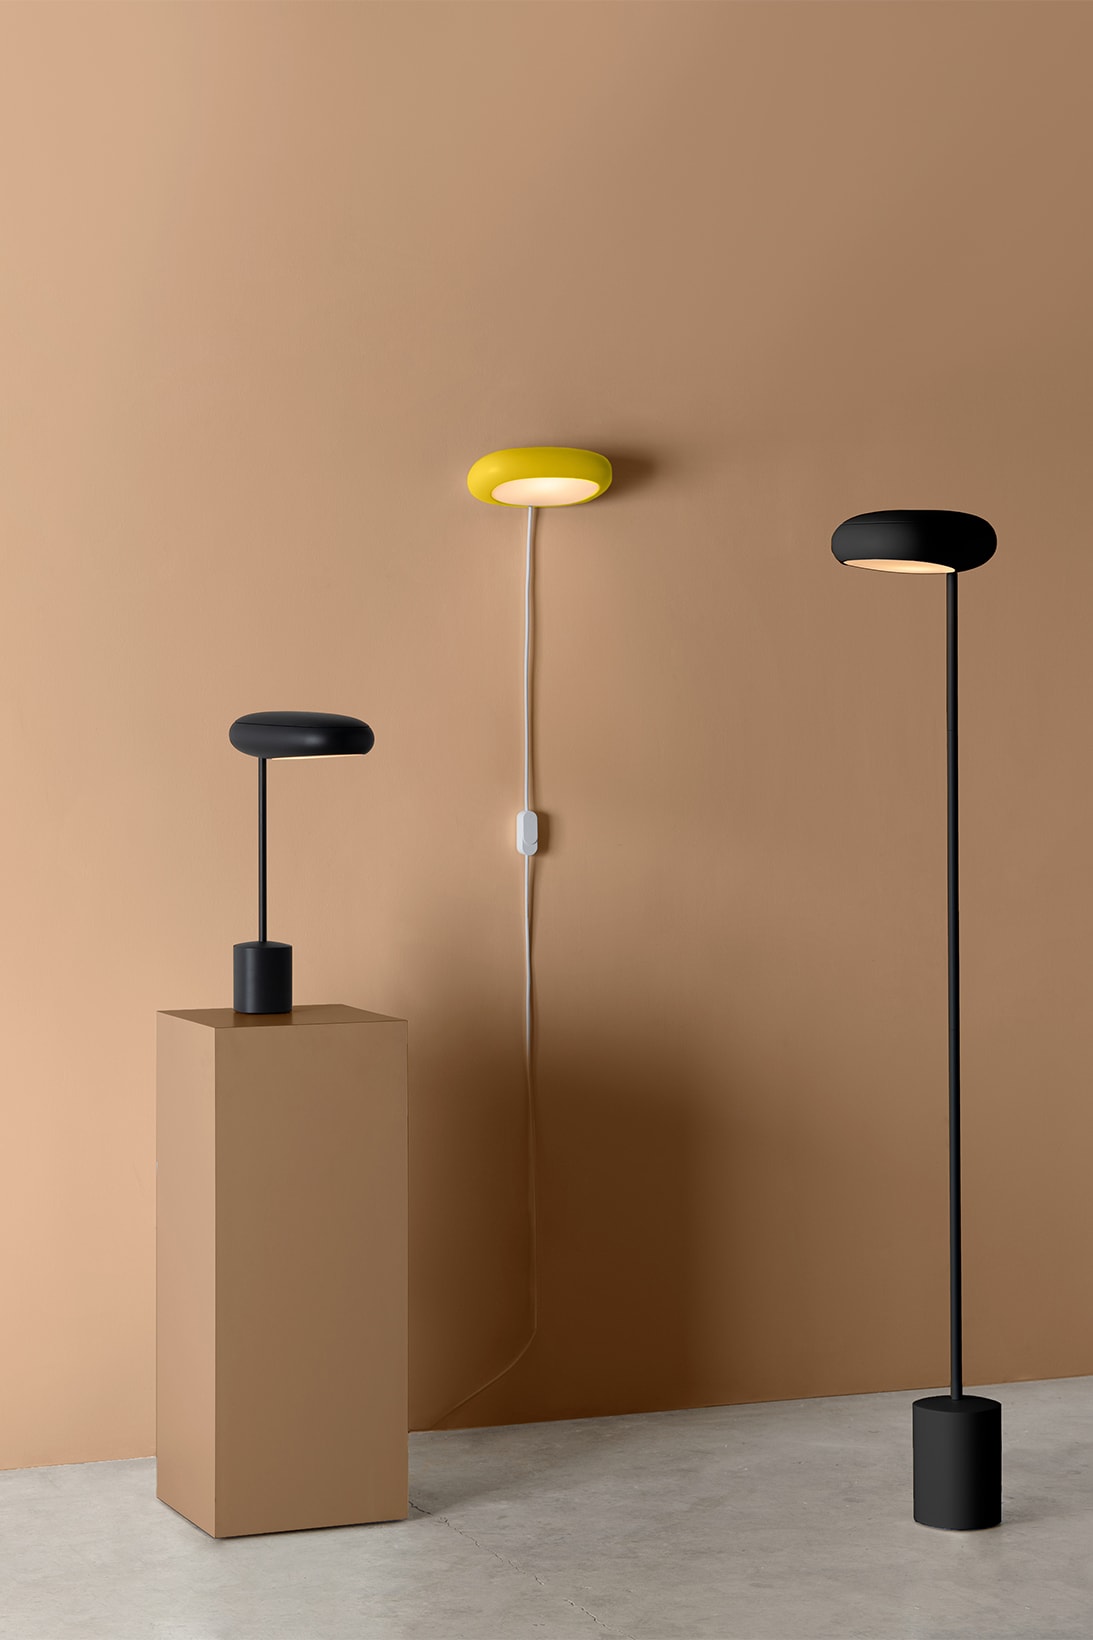 gantri palm lighting collection sustainable plant based reach 